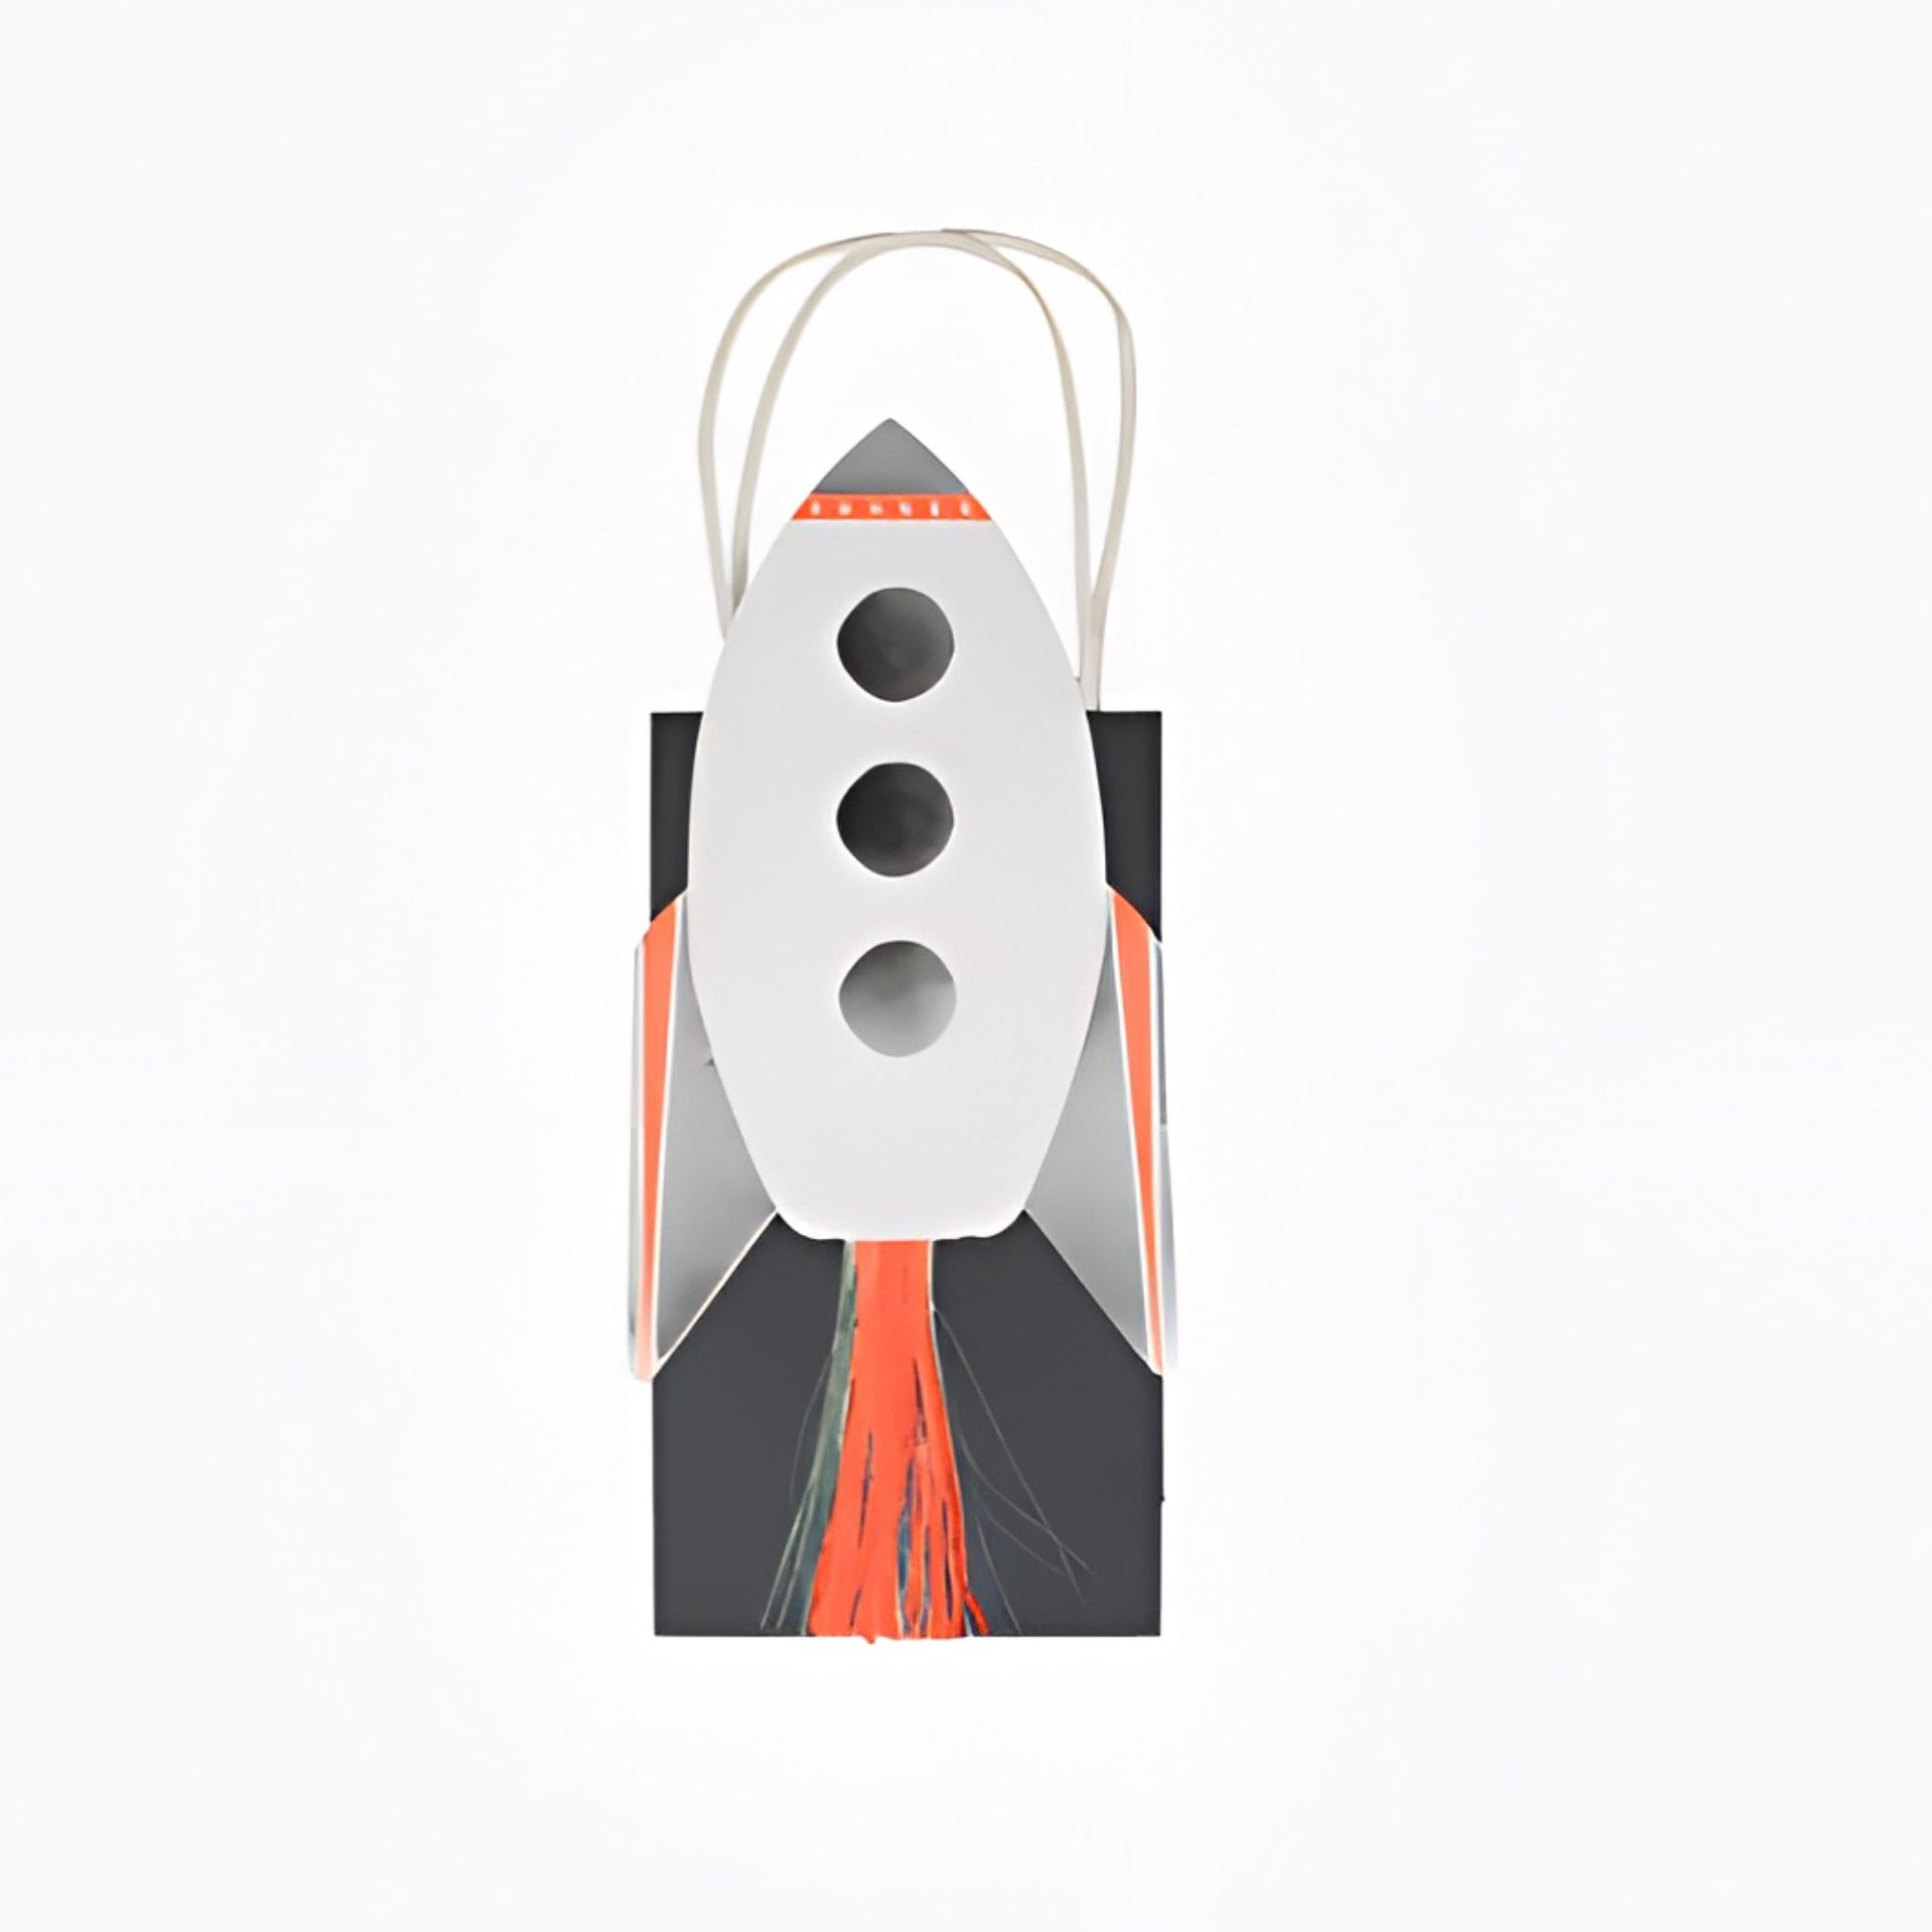 Rocket Shaped Party Bags by Meri Meri in Black, White and Silver with Orange raffia tassels for fire at bottom